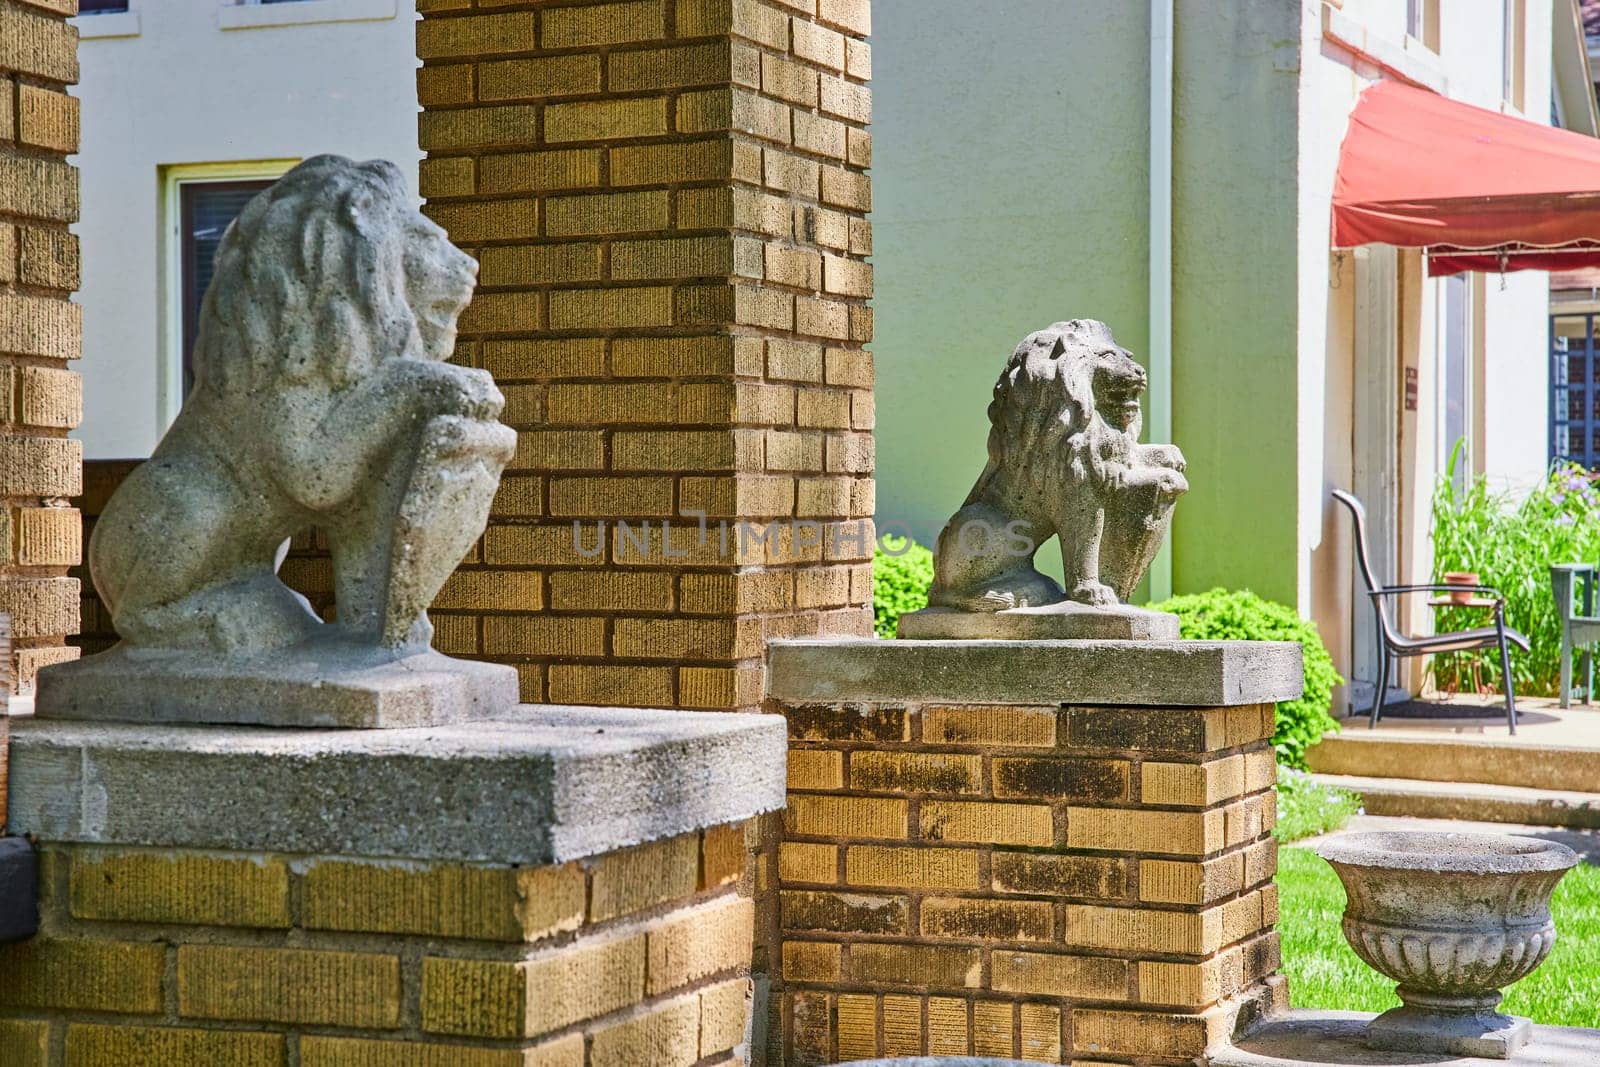 Elegant stone lions guard a historic home in Fort Wayne, symbolizing tradition and security under a clear blue sky.